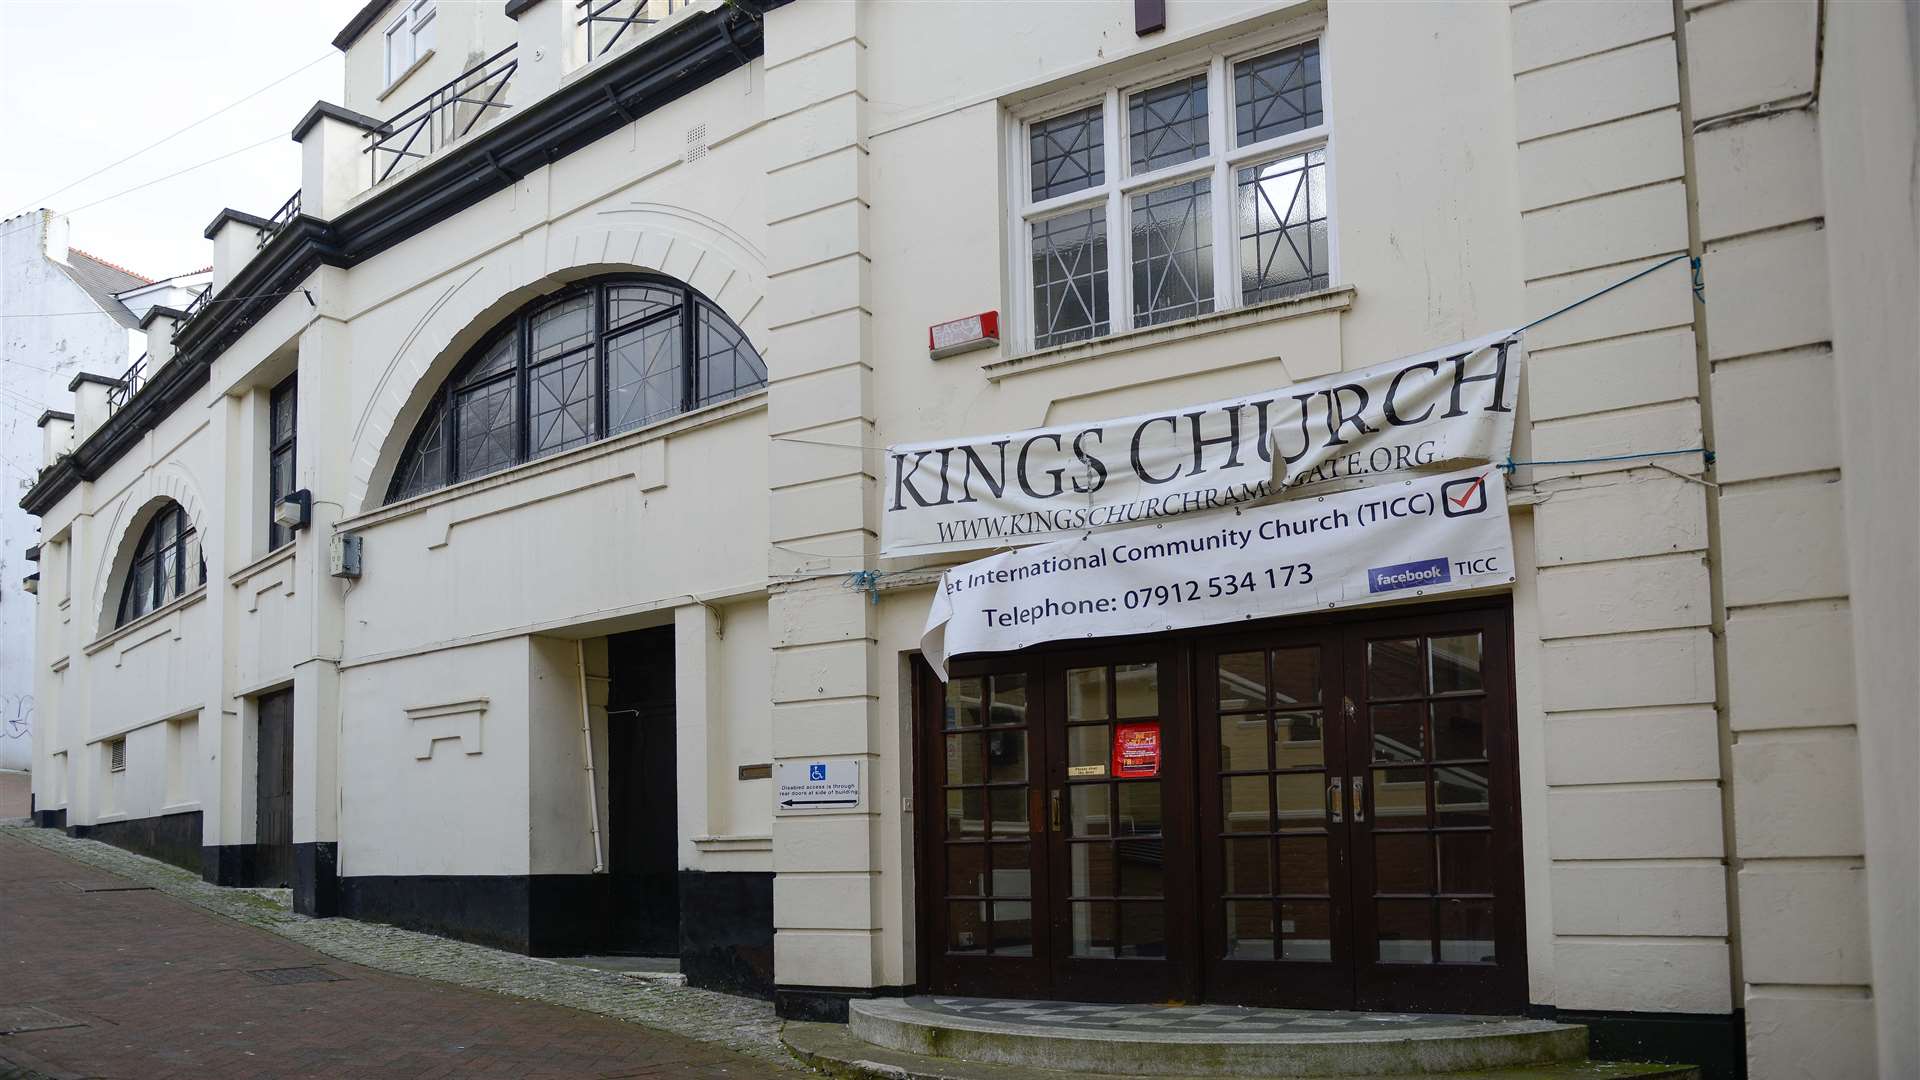 King's Theatre, King's Place, Ramsgate has gone up for sale again